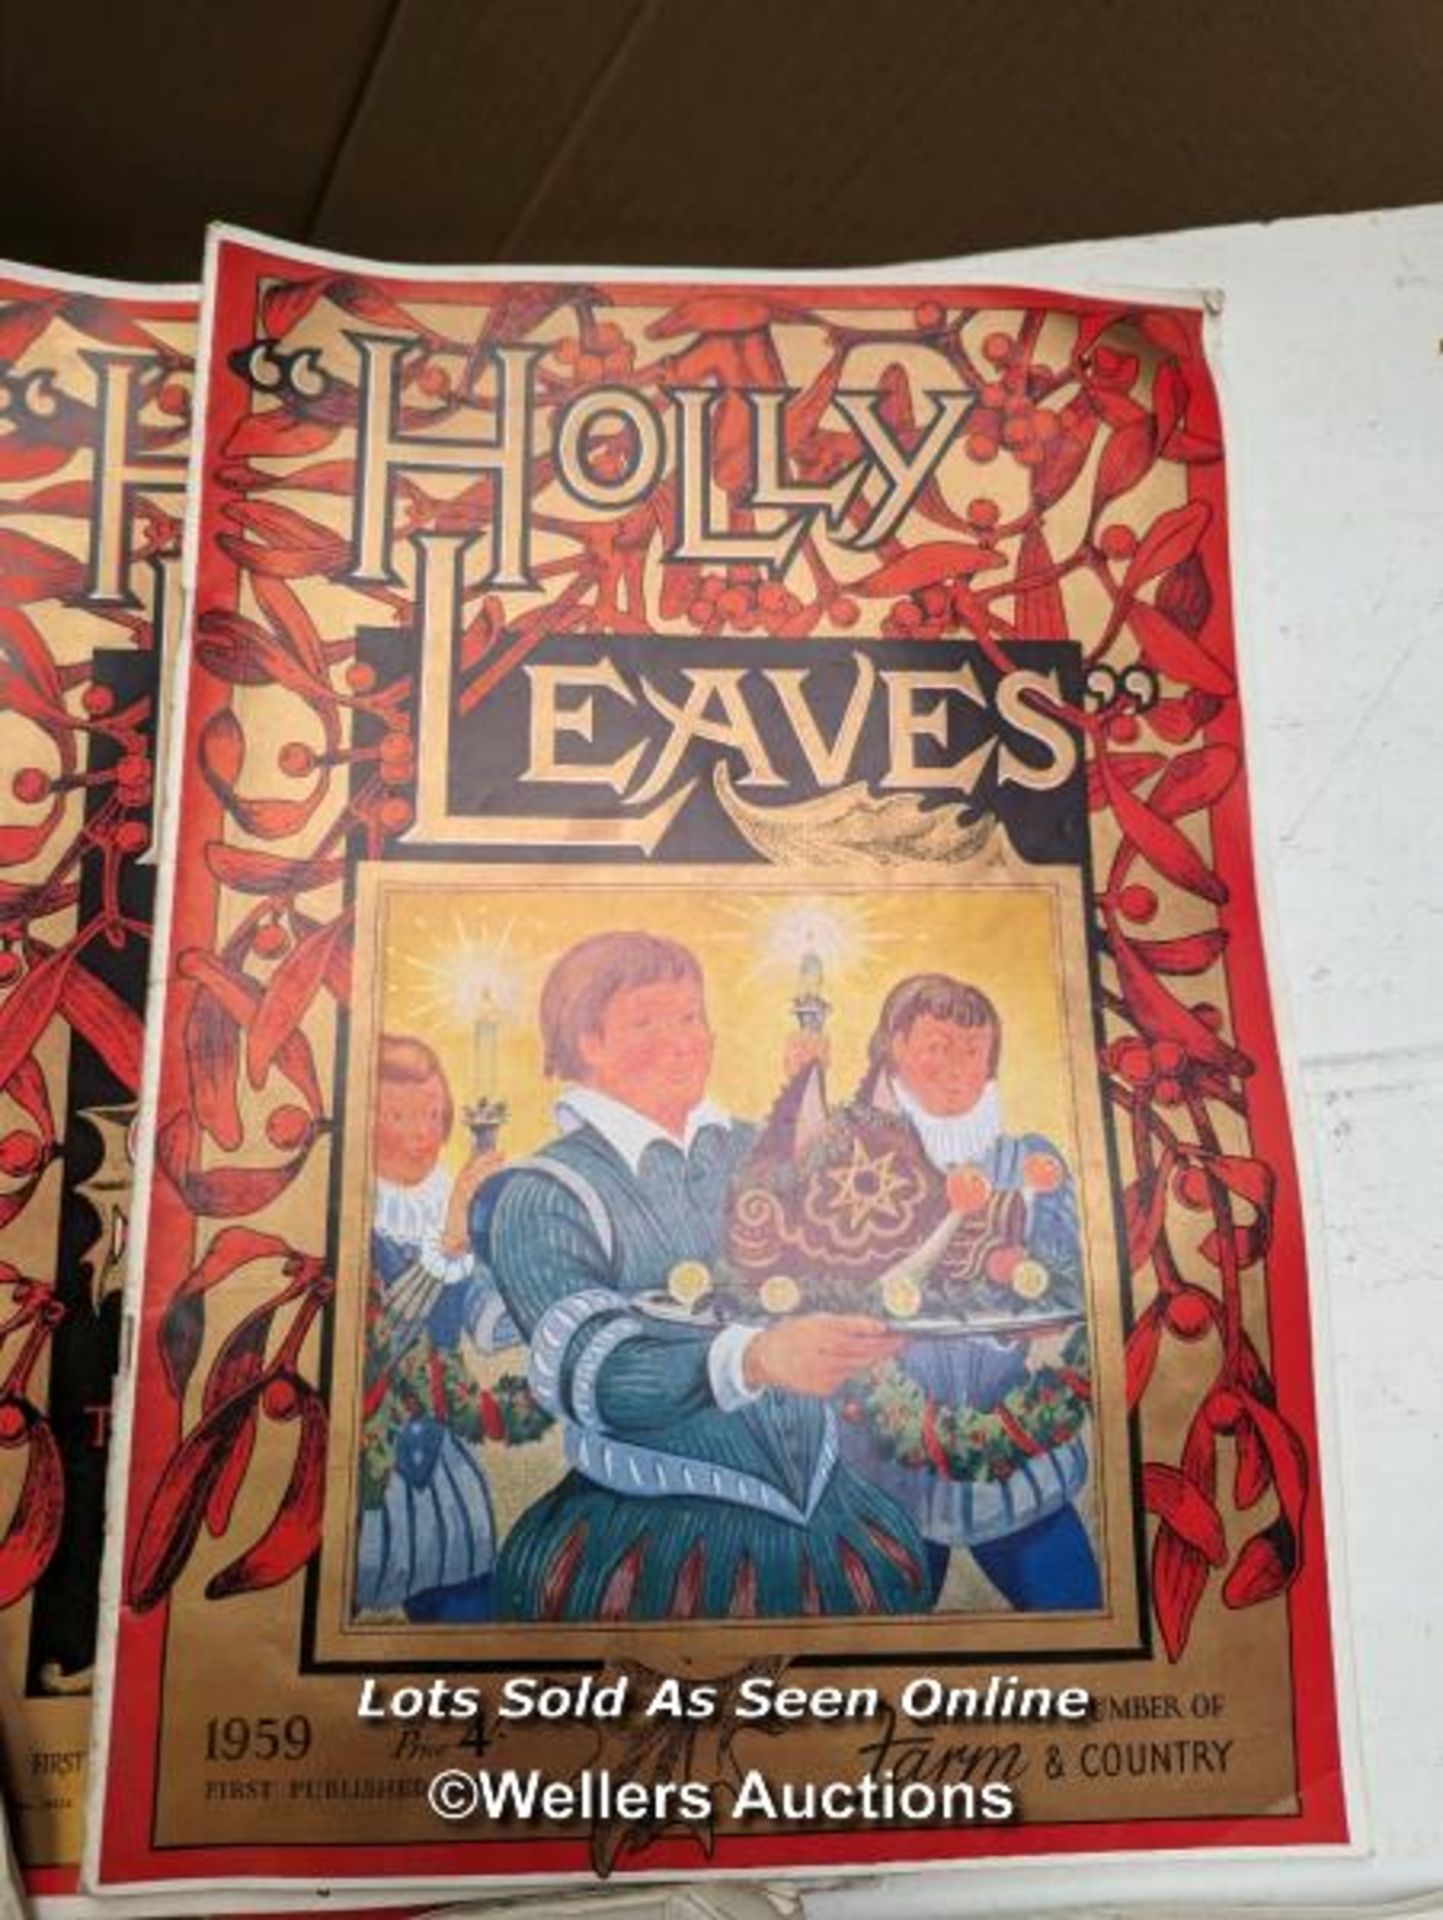 12 Christmas magazines inc Holly Leaves and The Sphere. Dates from 1946 to 1963. - Image 3 of 3